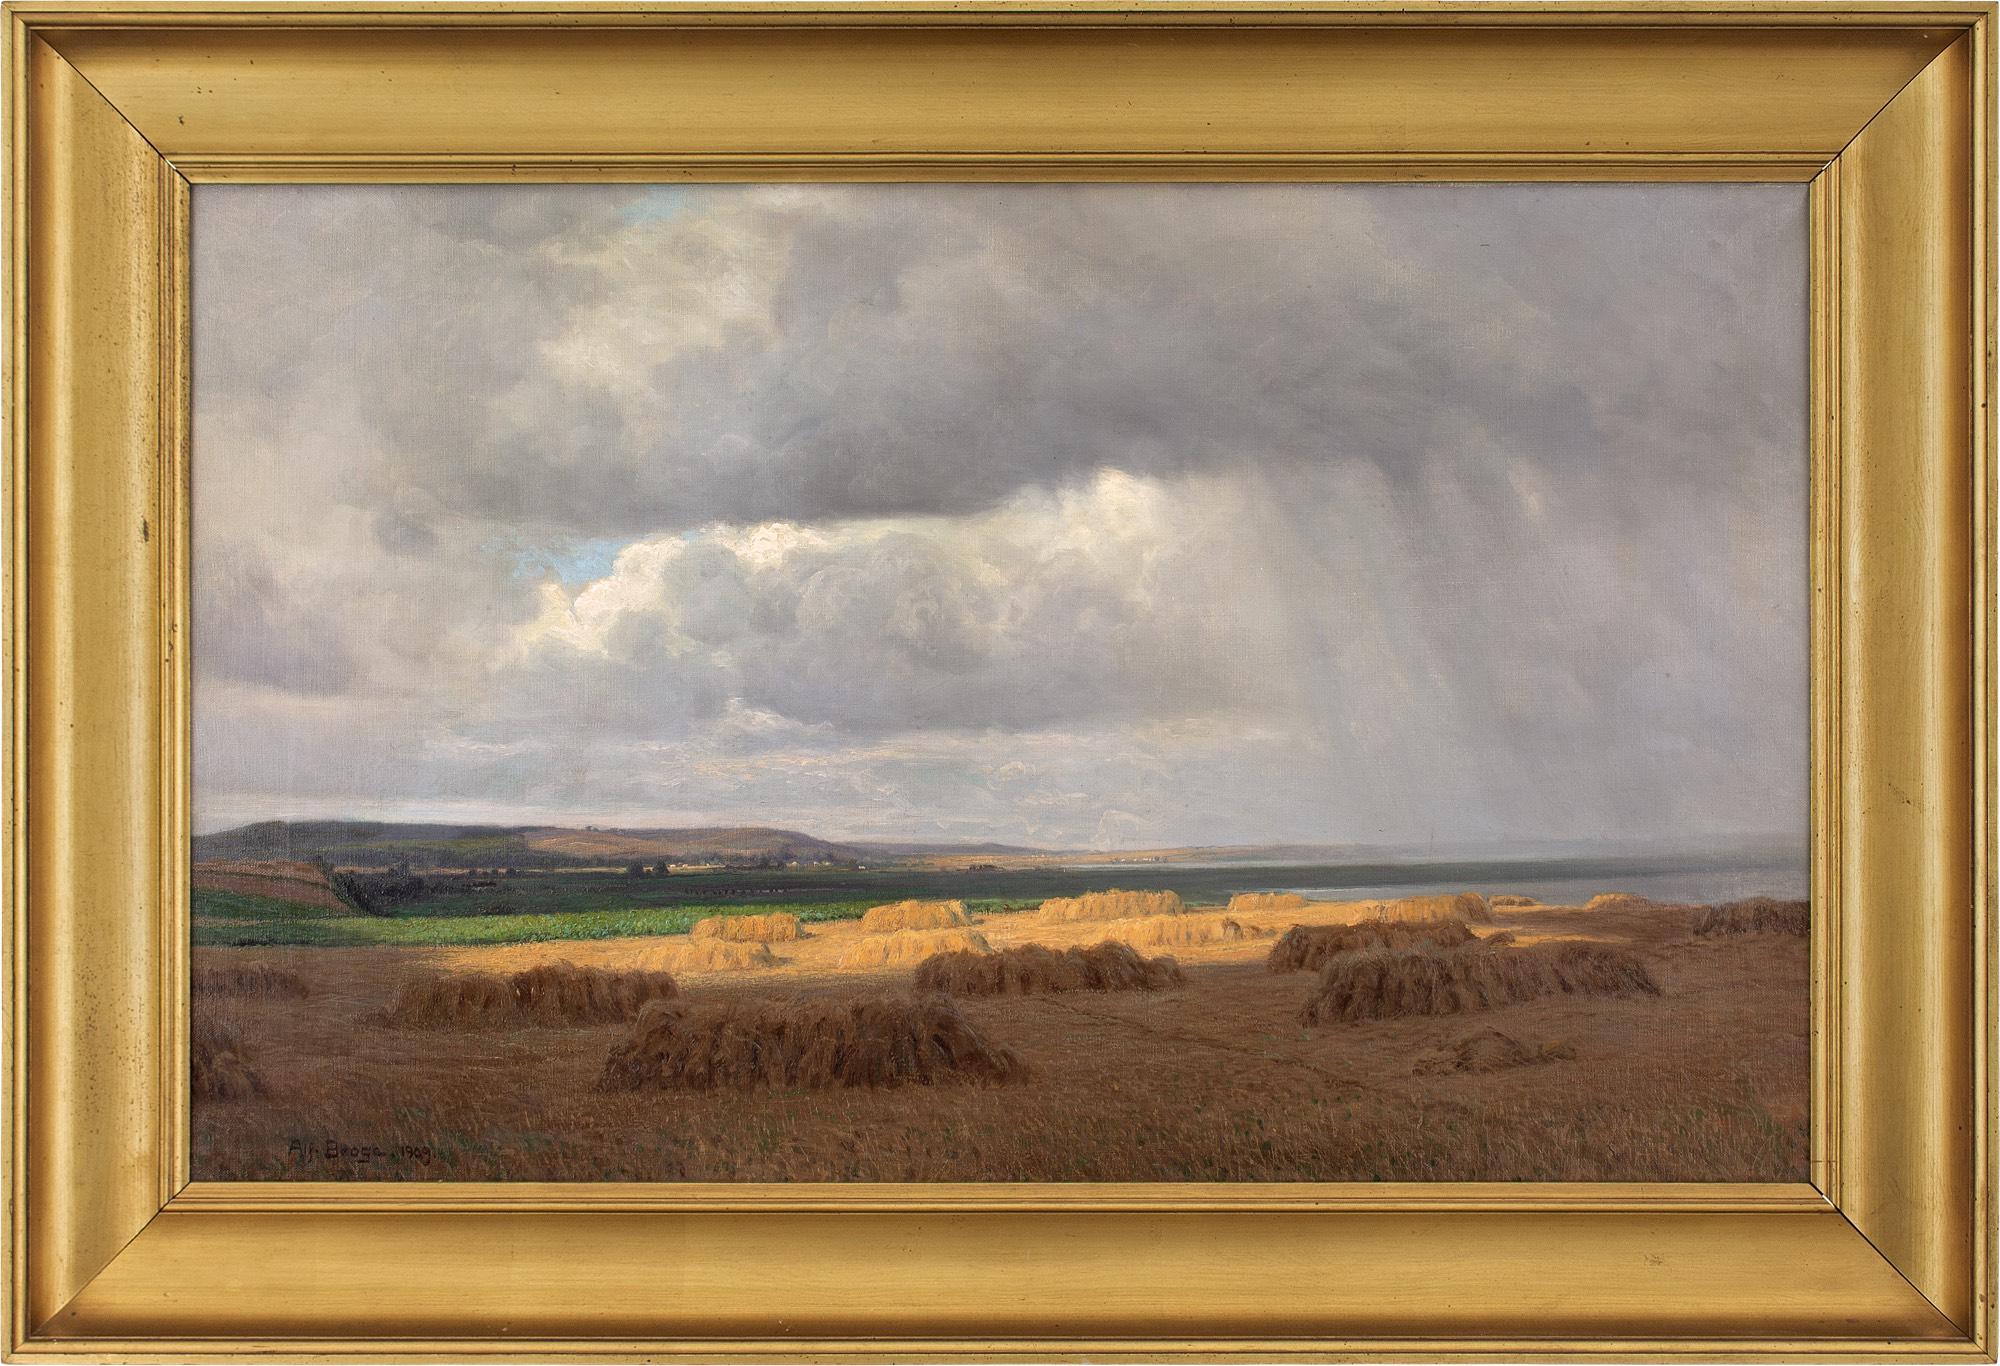 This early 20th-century oil painting by Danish artist Alfred Broge (1870-1955) depicts a rural coastal landscape with hayfield, crops, and distant hills. It’s a masterful work, with the light carefully observed as it breaks through a gap in the rain